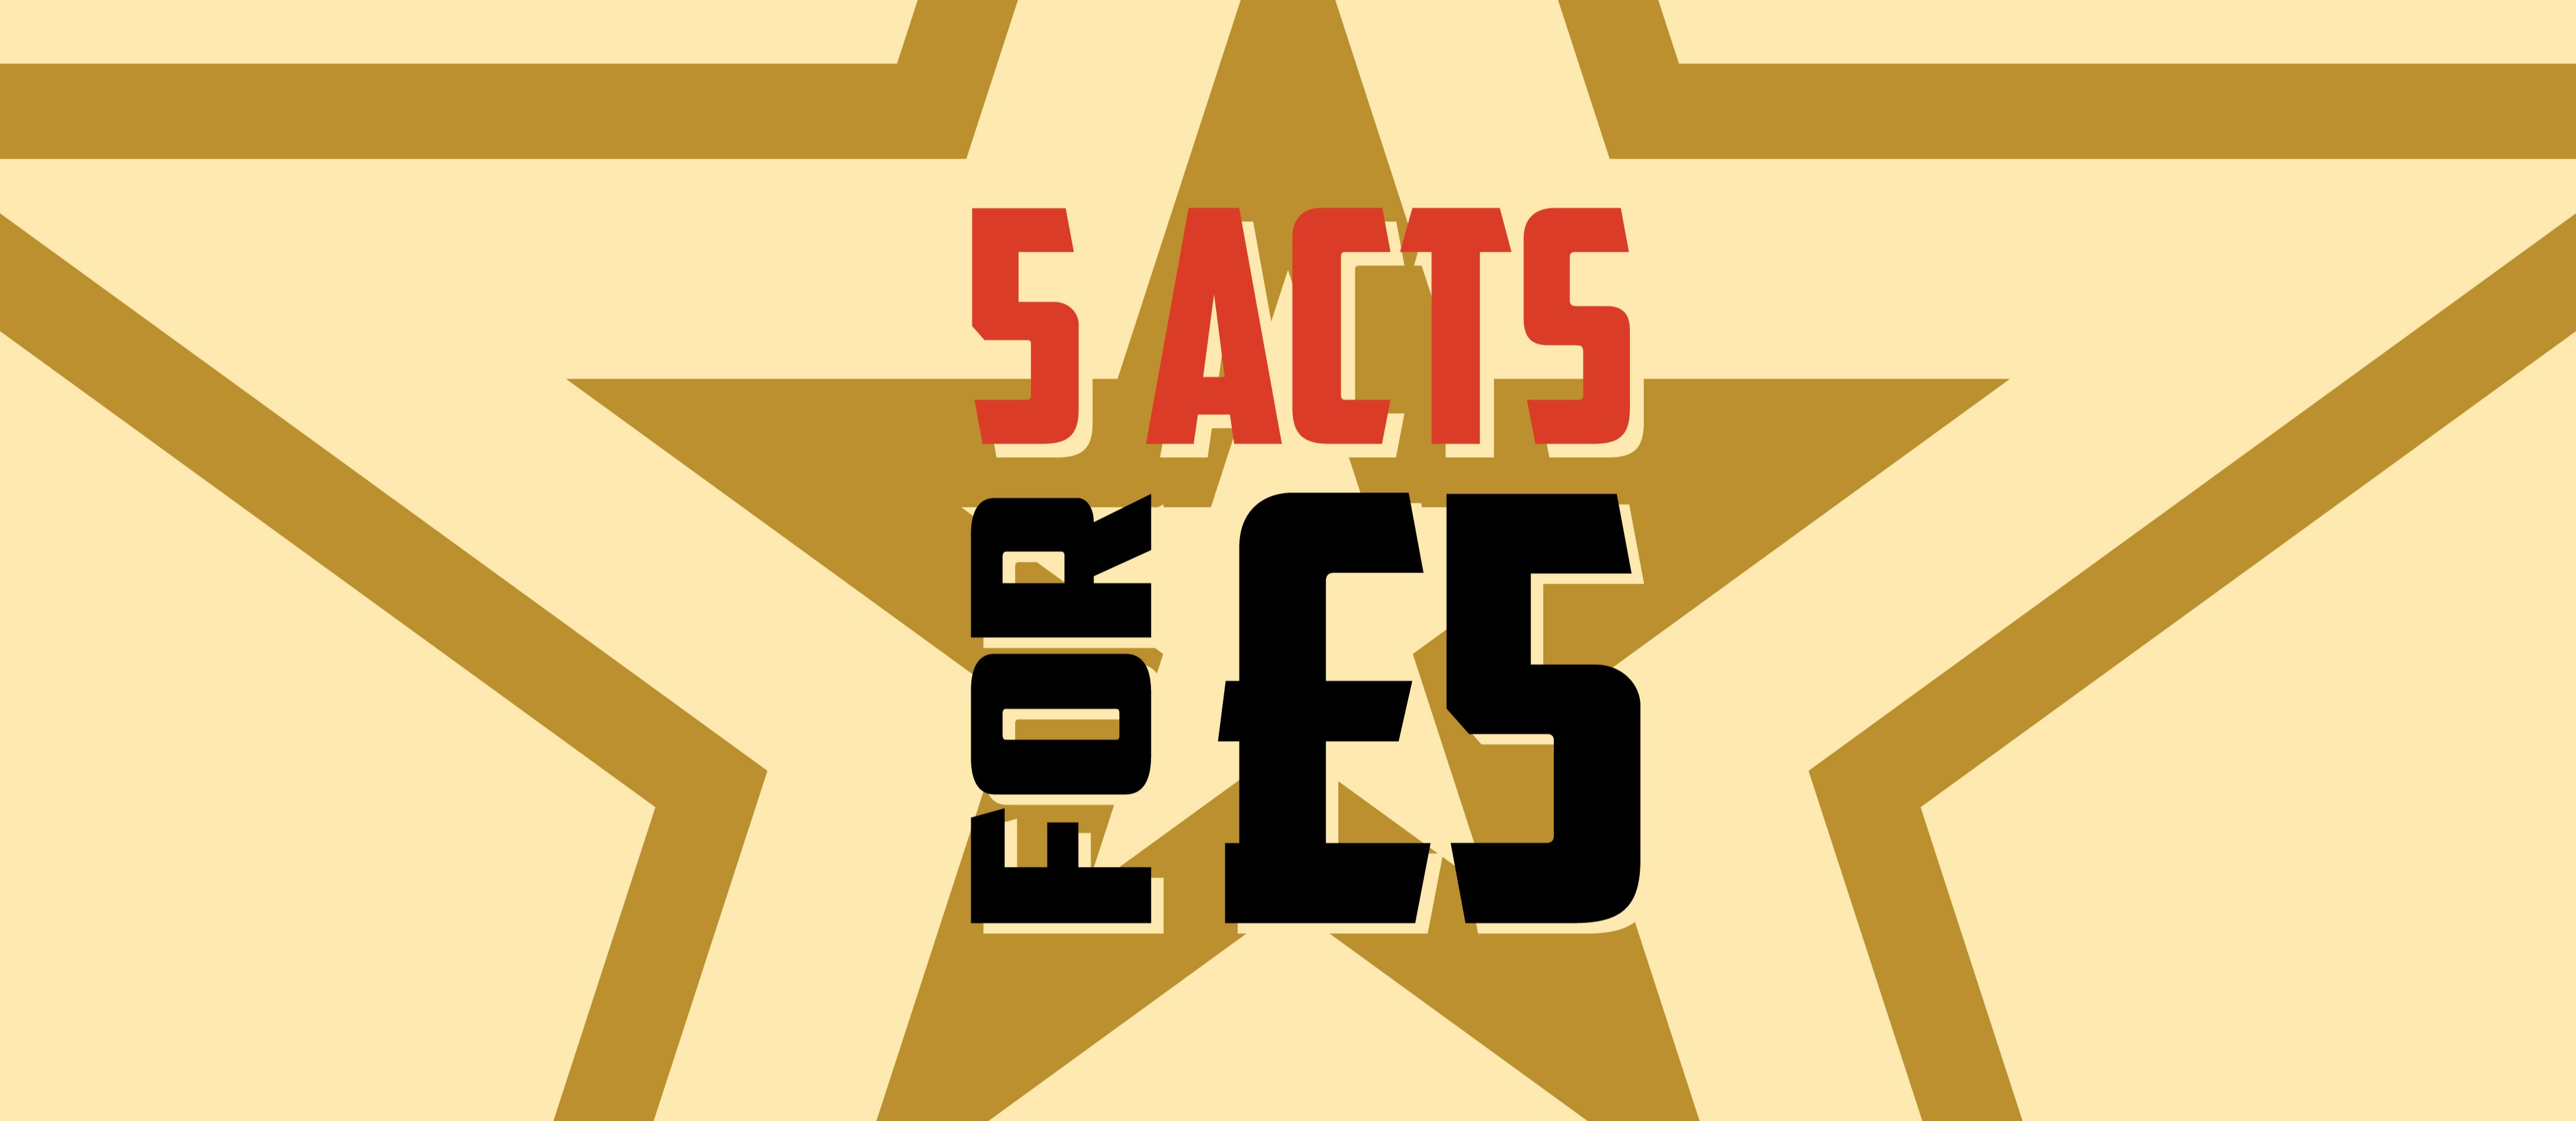 6 acts £5 - Leicester 